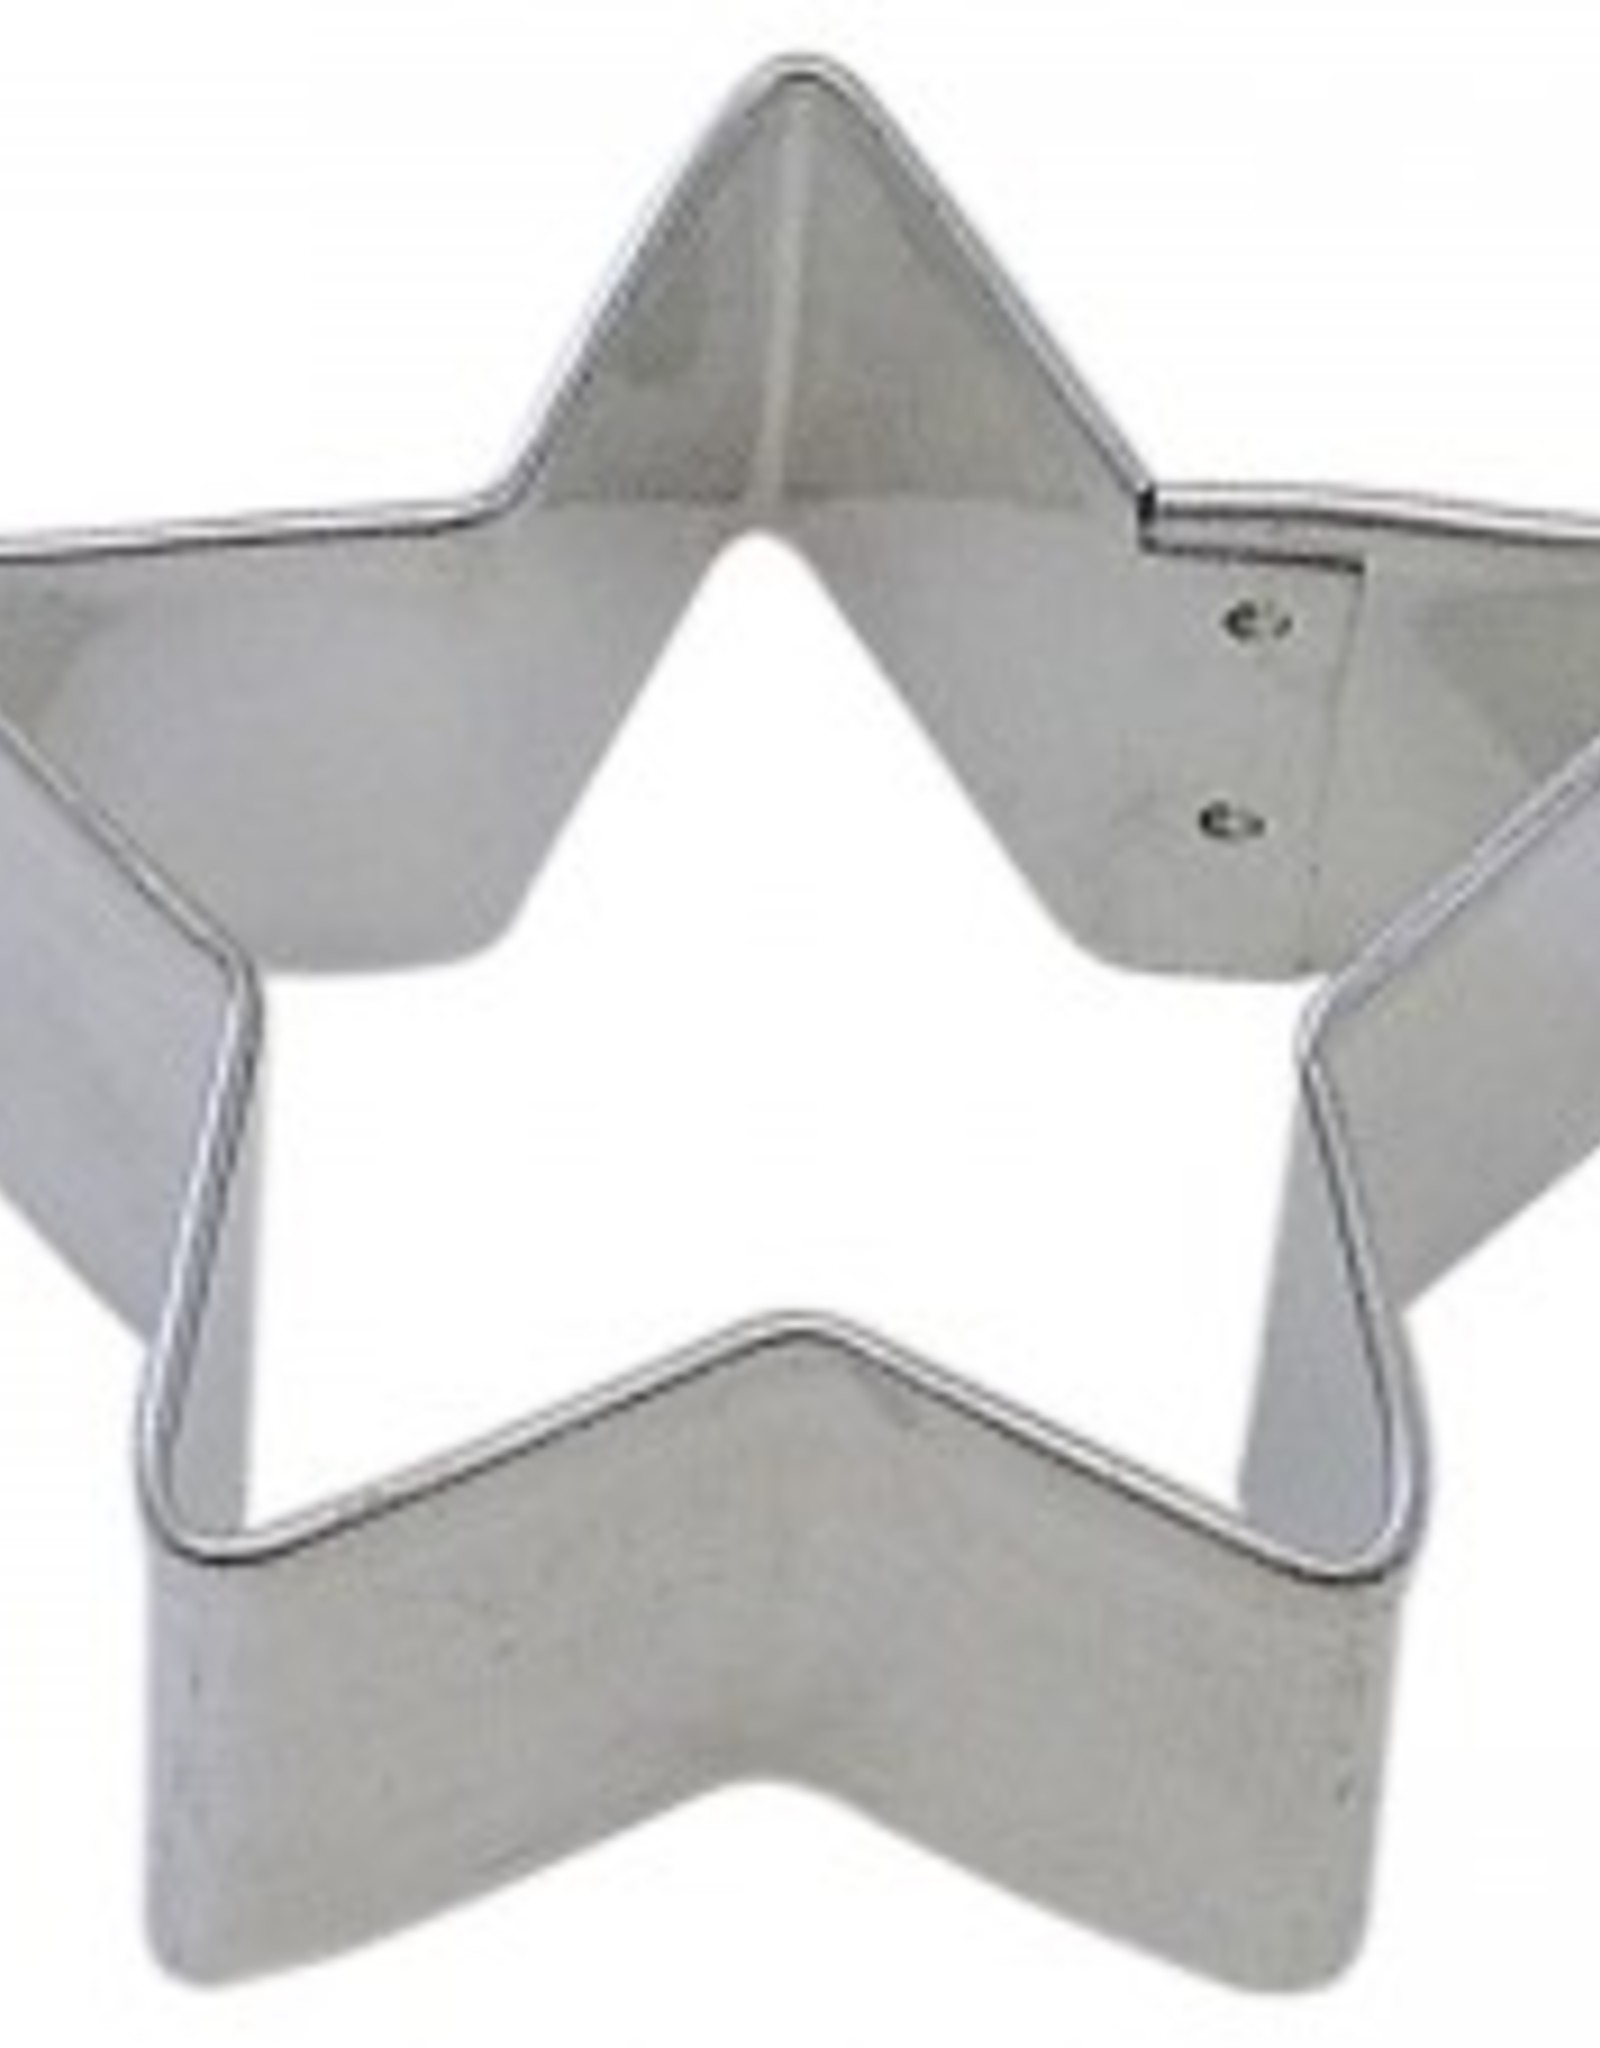 R and M Star Cookie Cutter, 2"